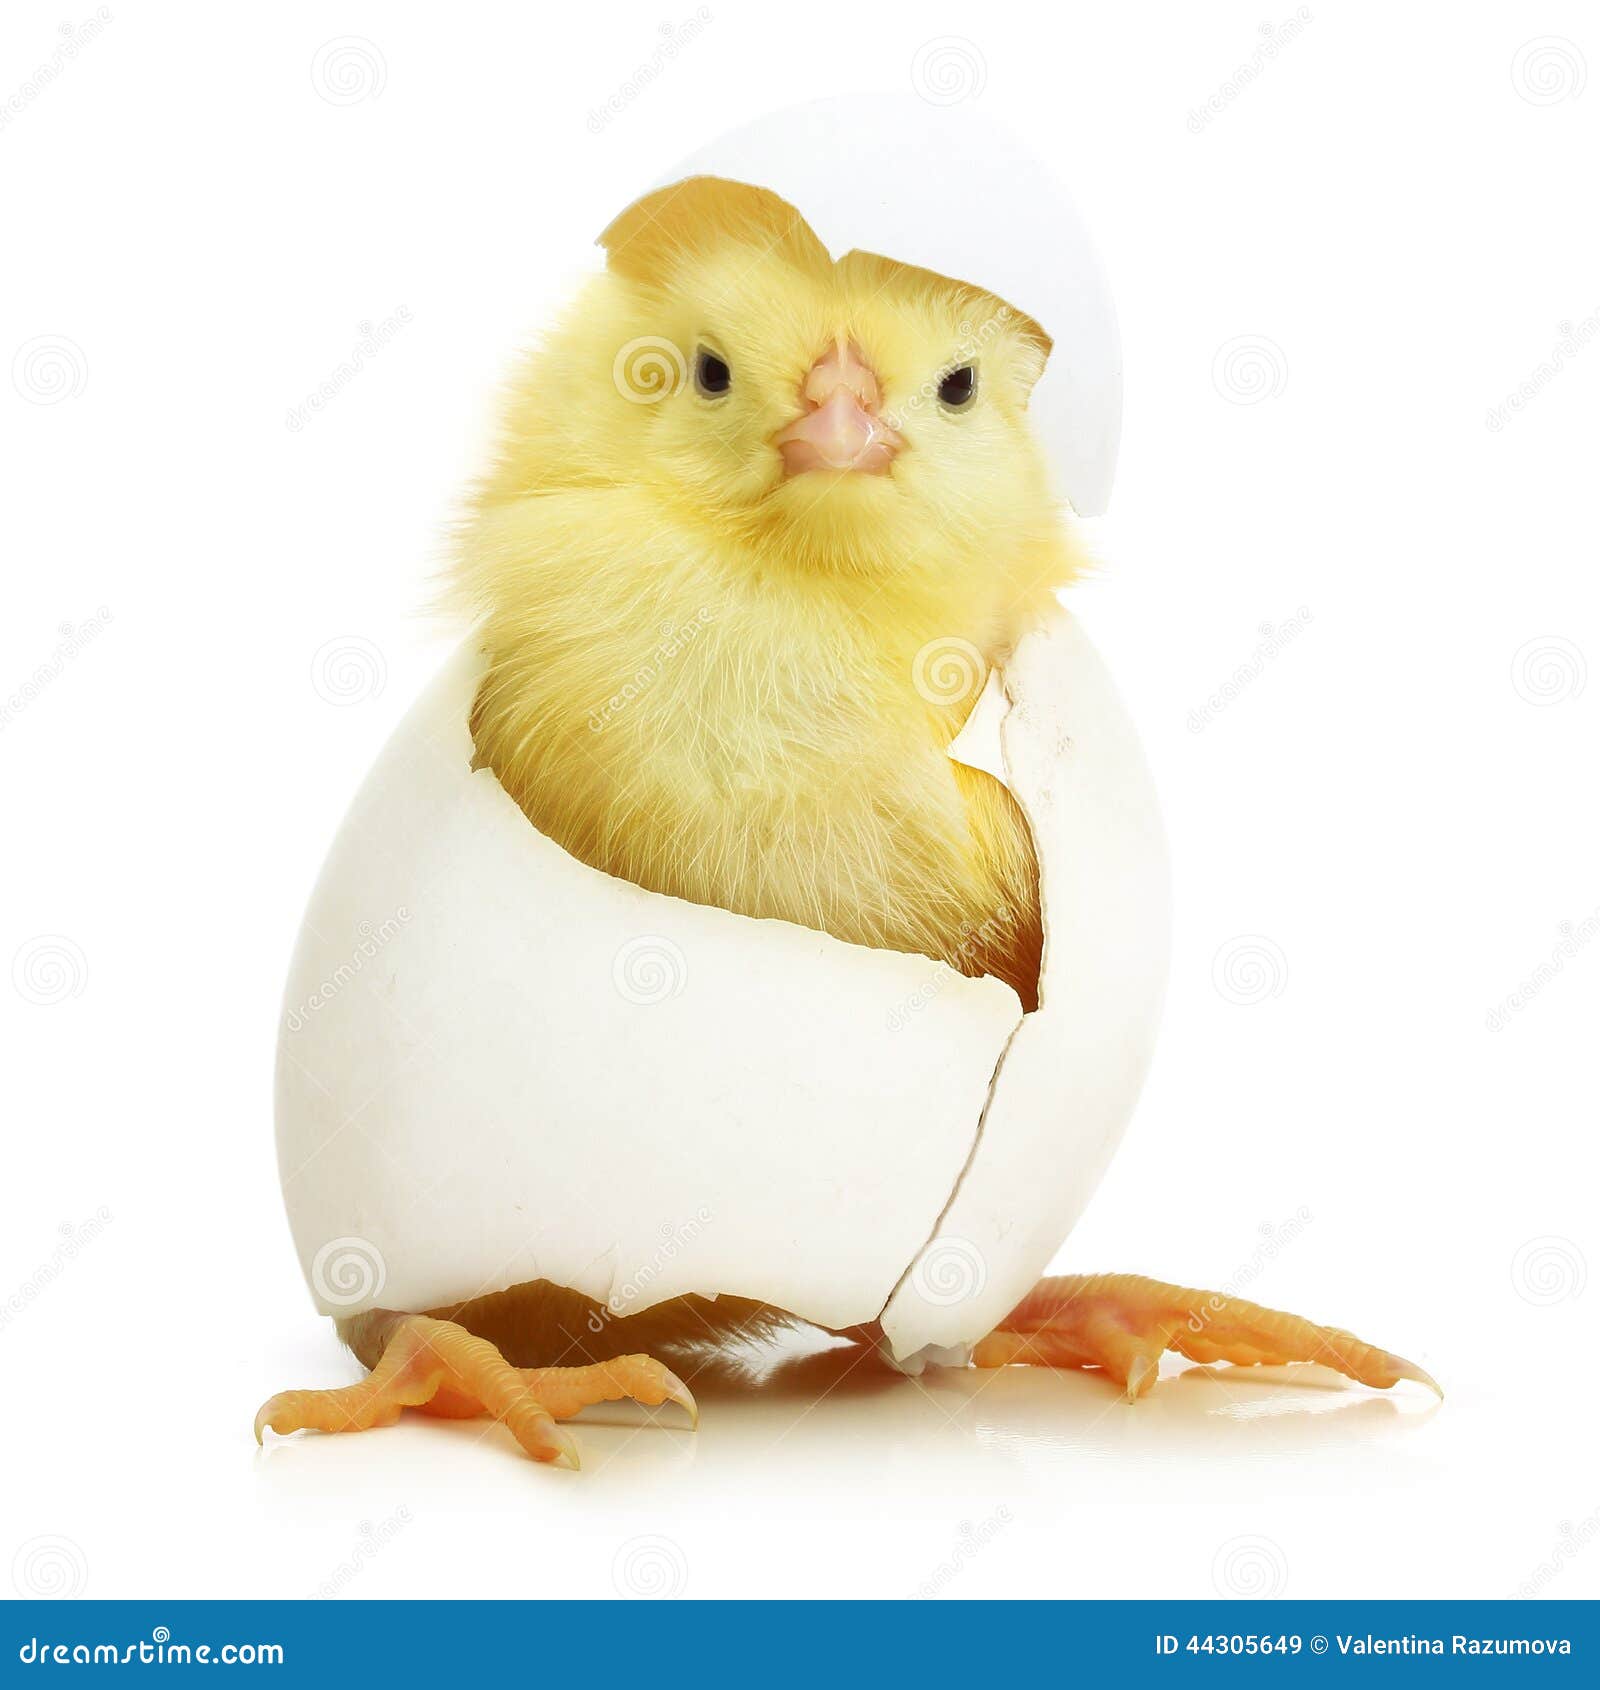 cute little chicken coming out of a white egg